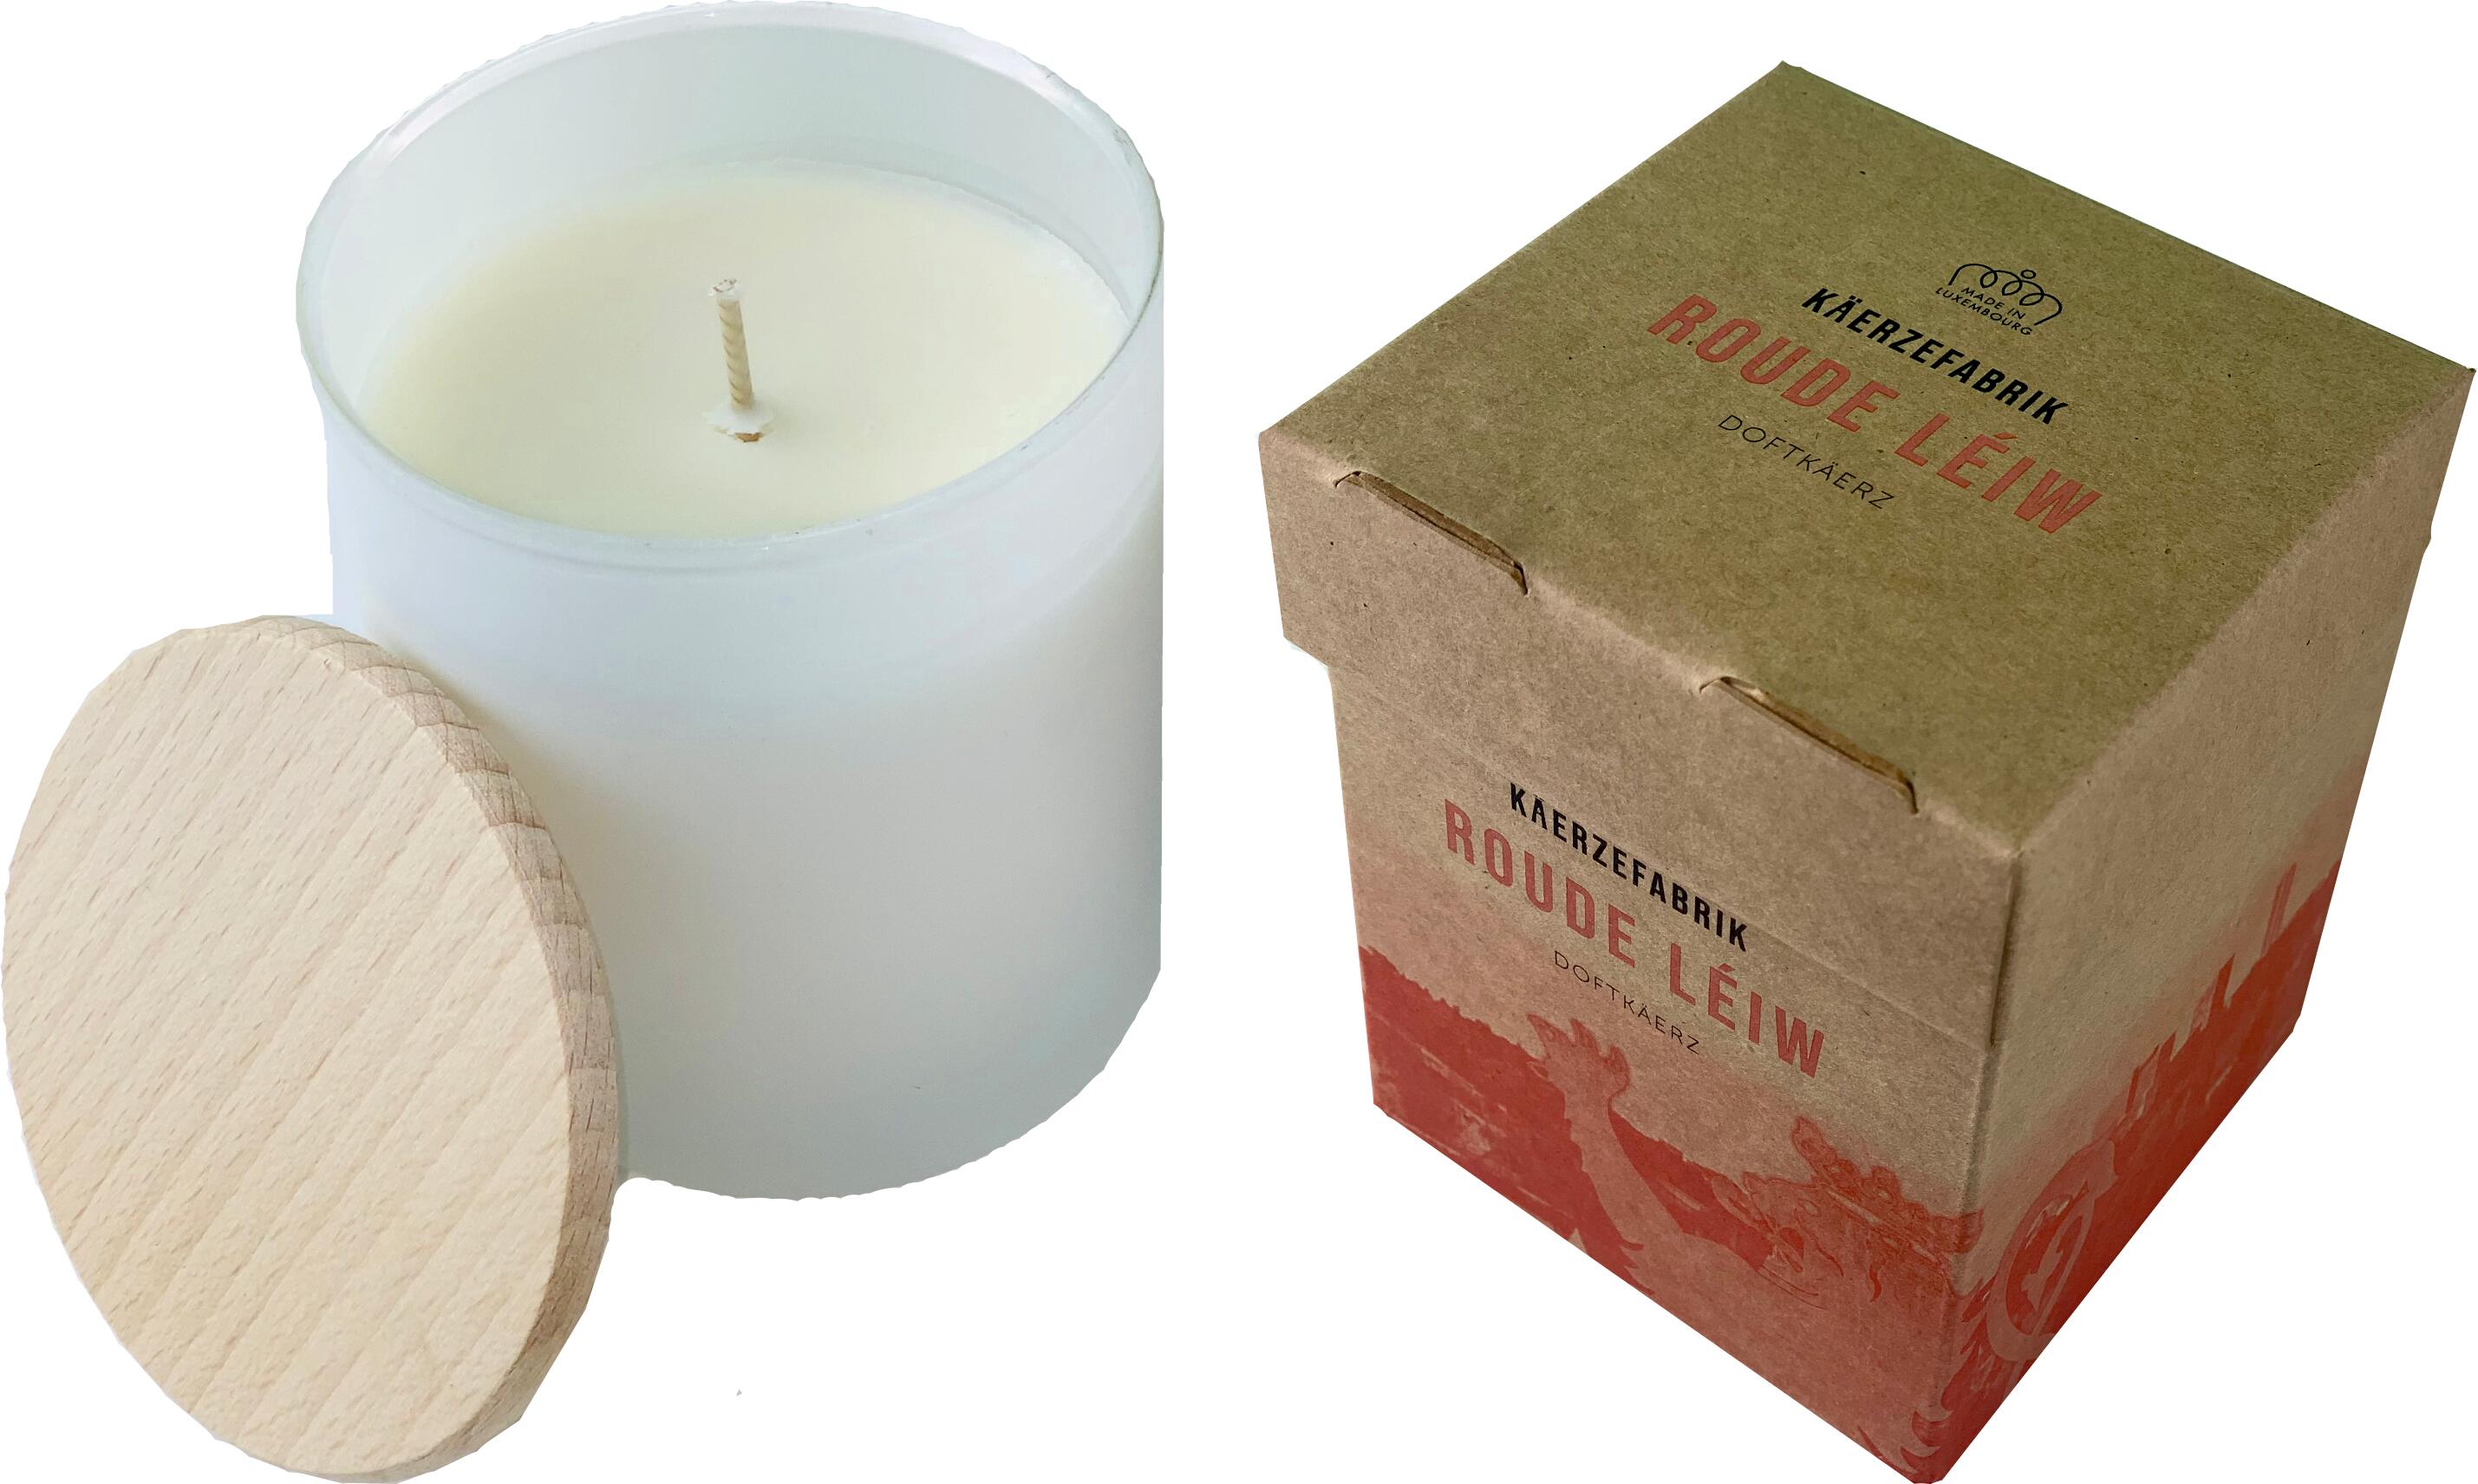 Scented candle "Roude Léiw